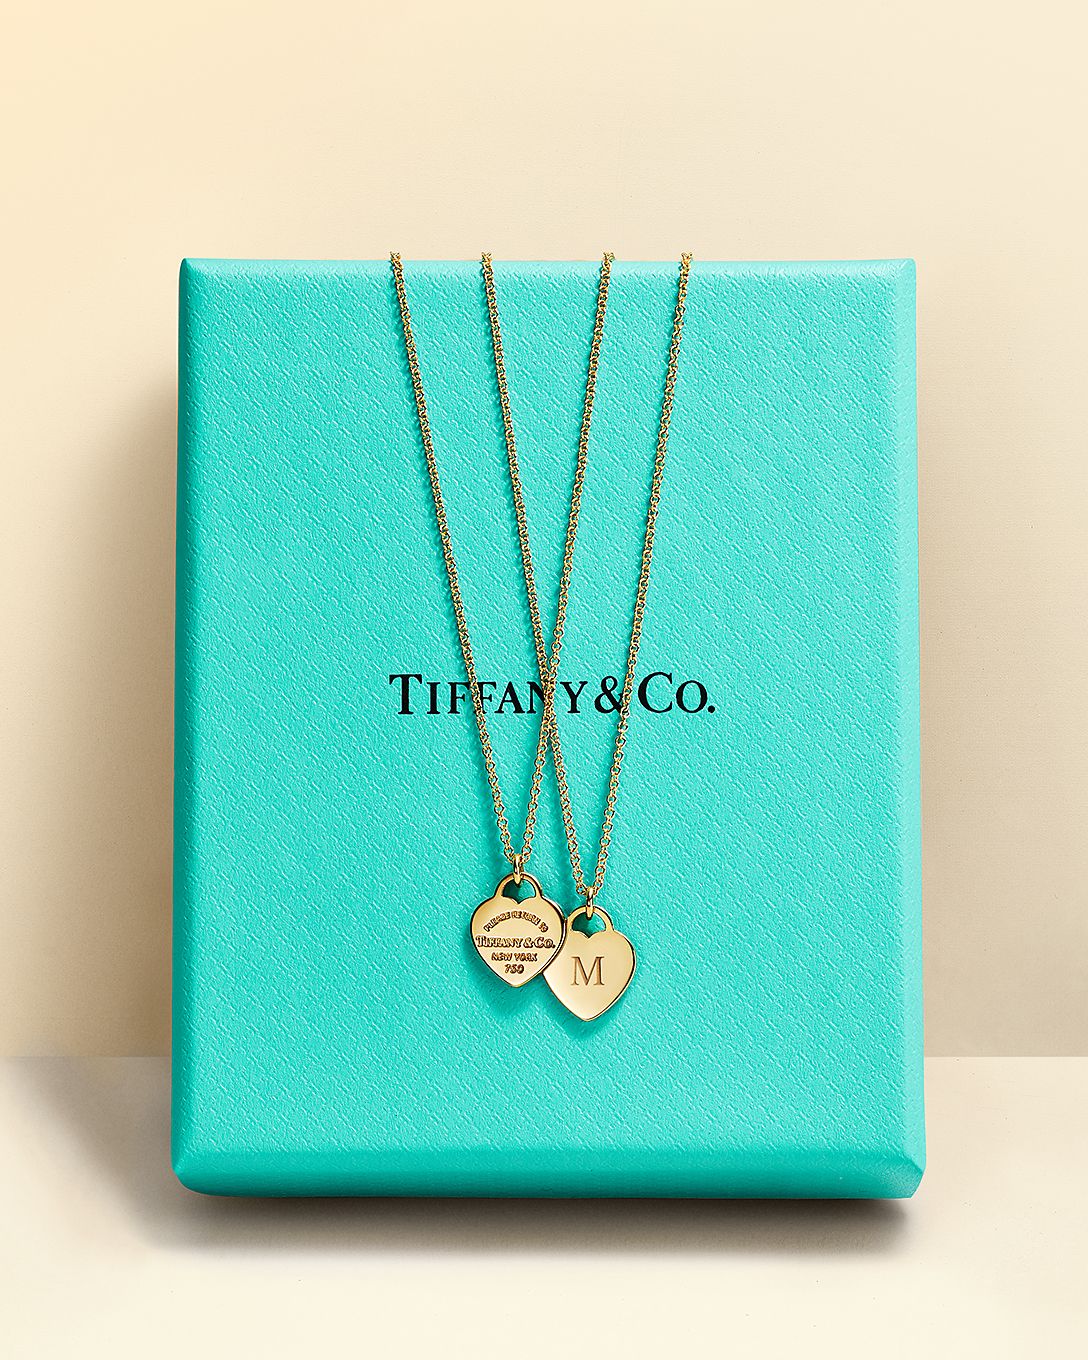 Tiffany & Co. Uk | Luxury Jewellery, Gifts & Accessories Since 1837